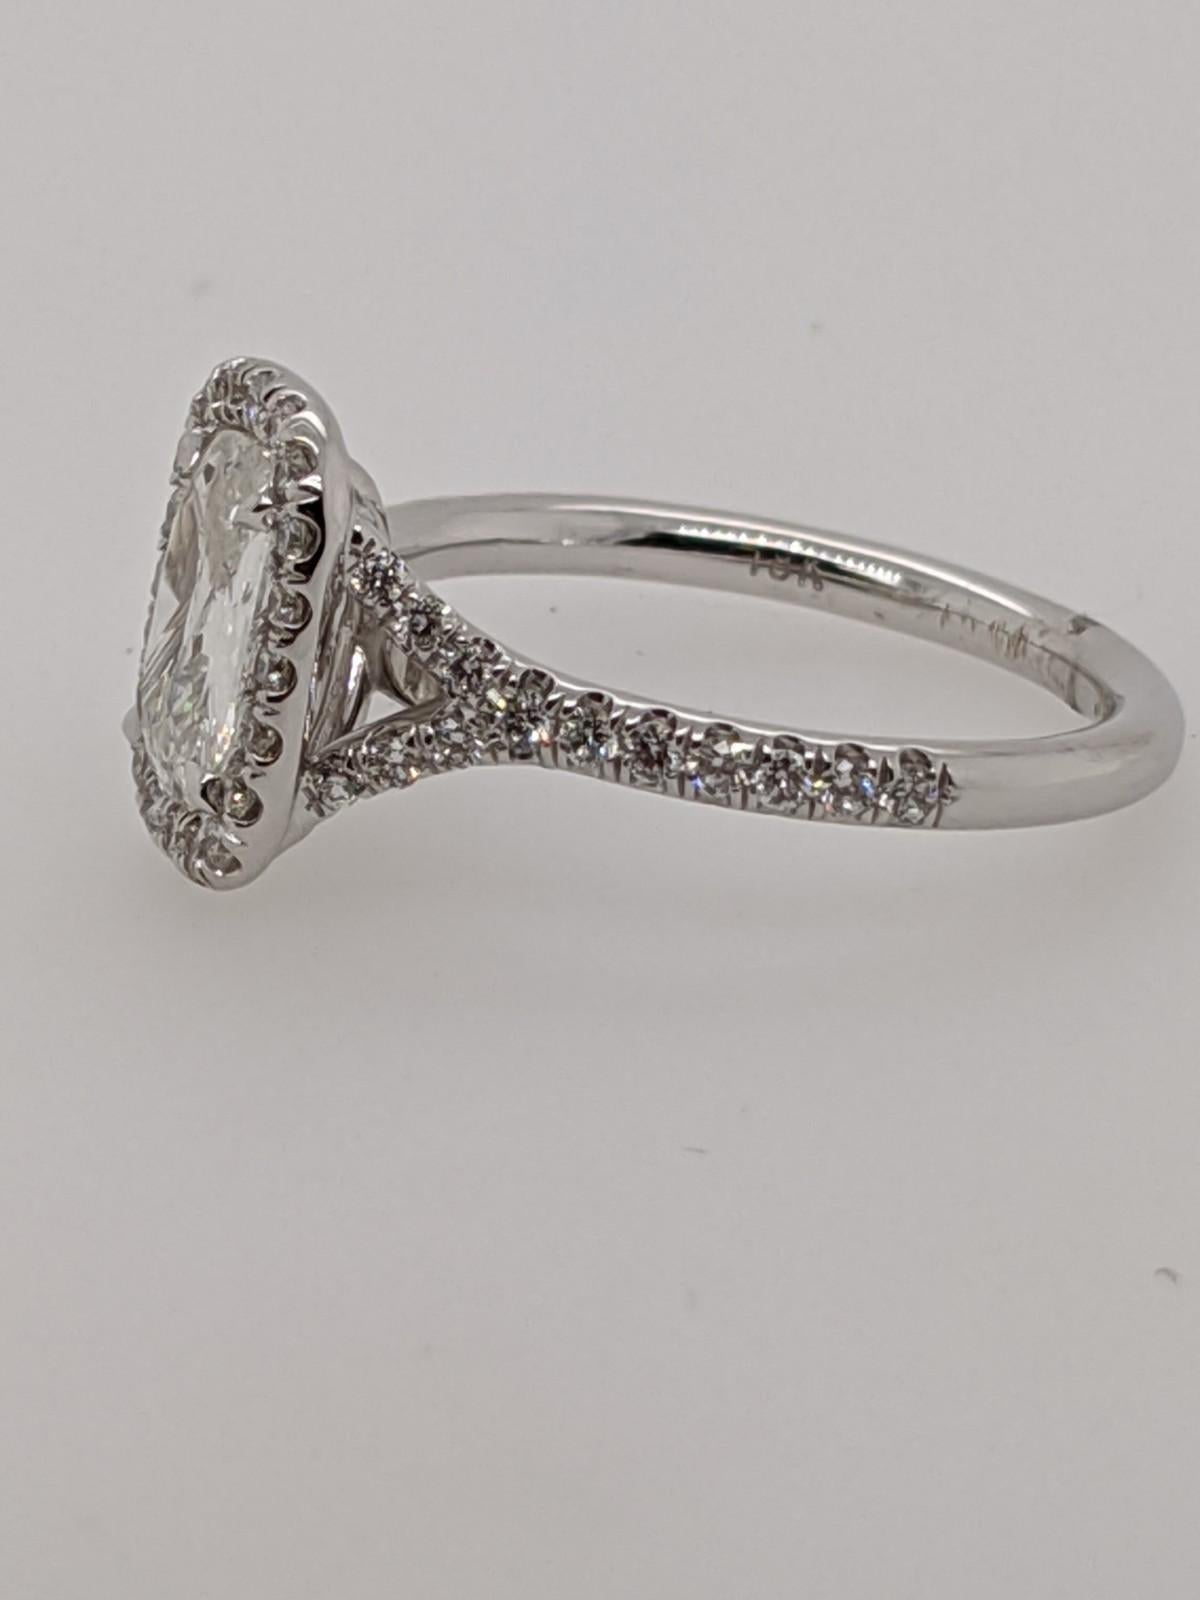 Classic 18 karat white gold split shank halo ring handmade in the United States.  Featuring a 1.04 carat E color VVS2 clarity antique style cushion with GIA grading report number 2175294290.

This listing is one of hundreds of cushion cut diamonds